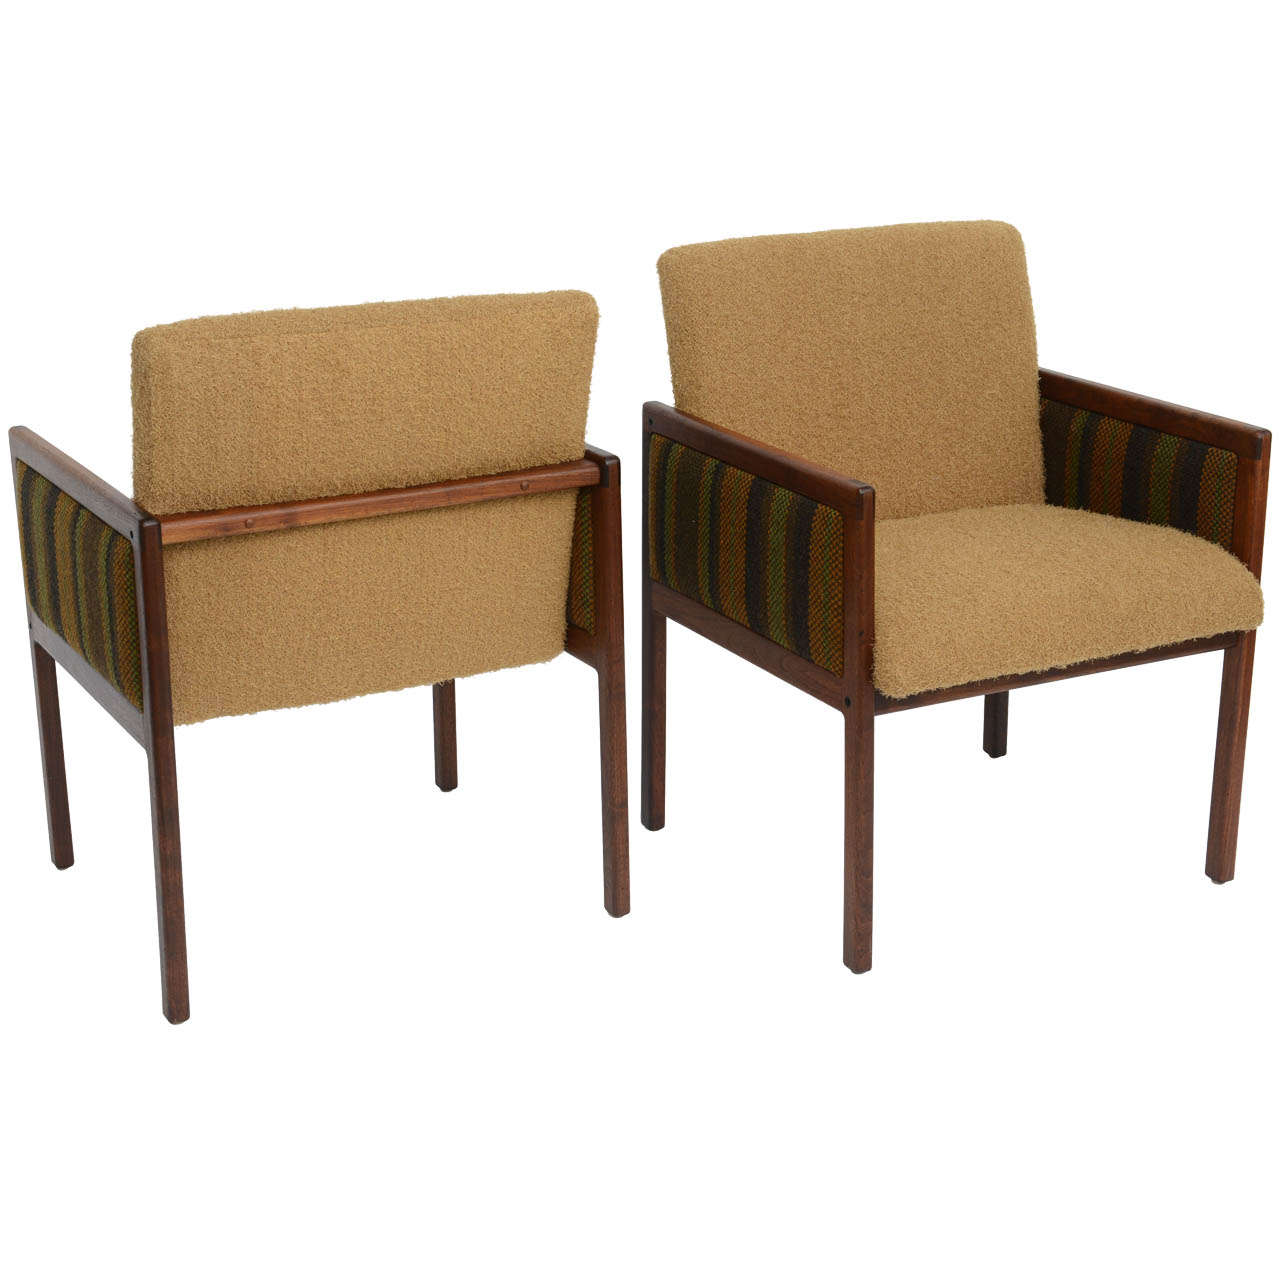 1960's Modern Mode of California Upholstered Walnut Armchairs